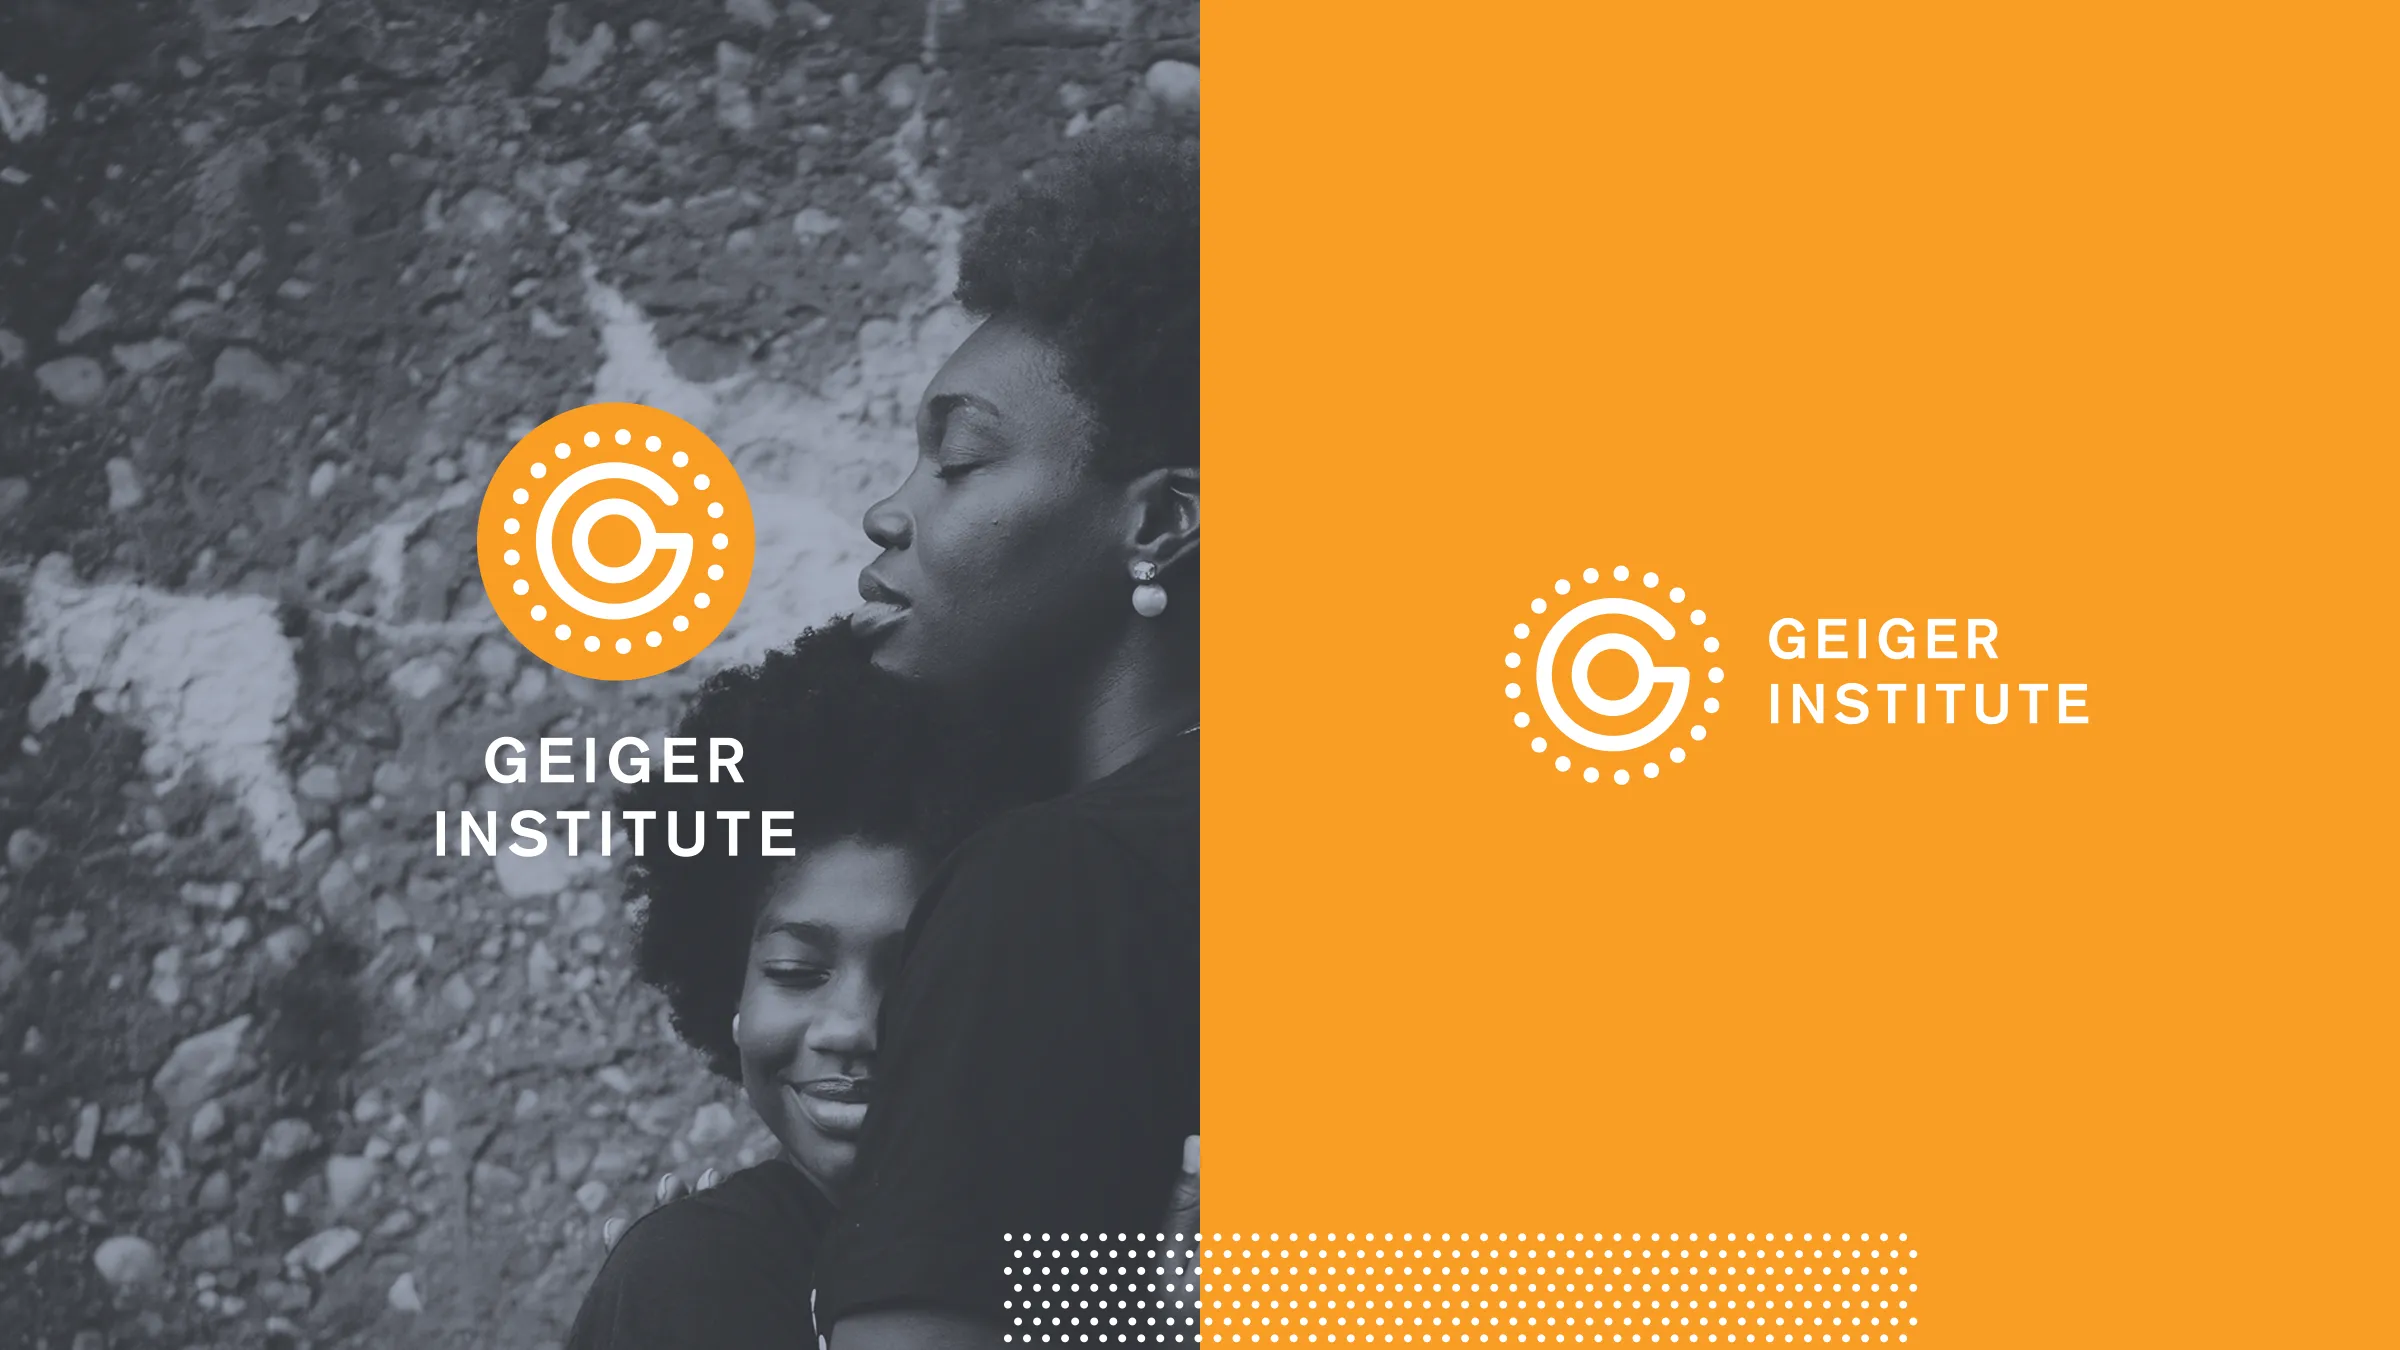 Branding & identity for The Geiger Institute